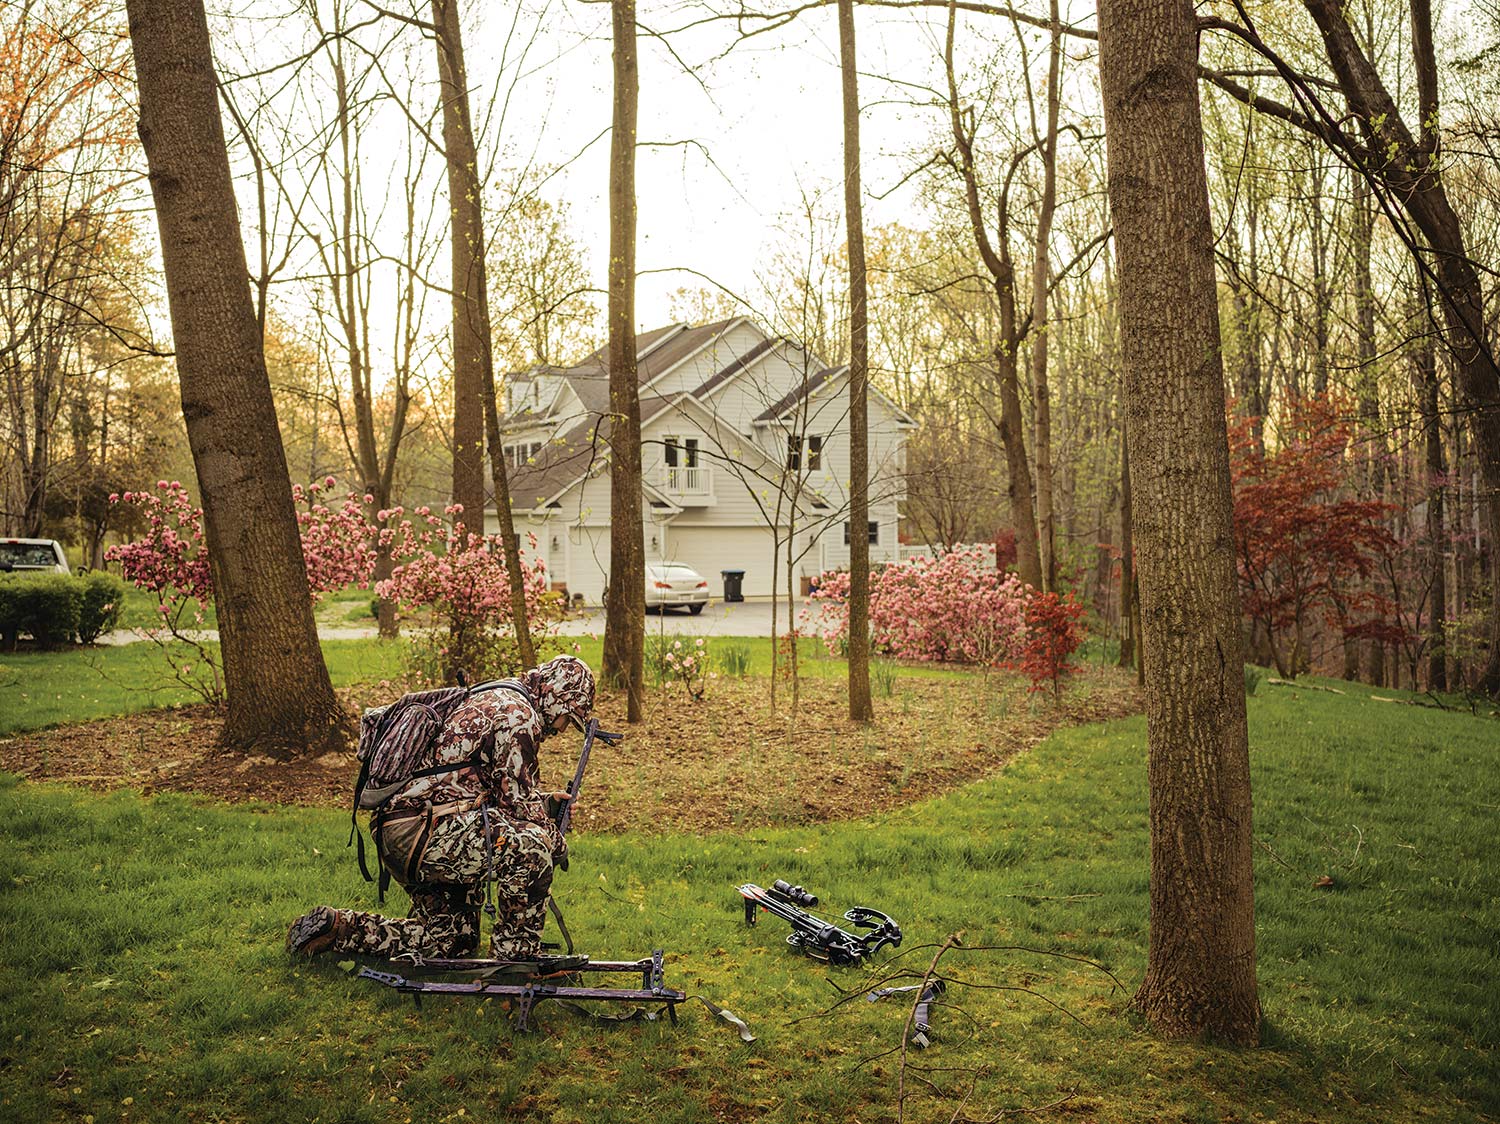 A hunter in full camo prepares hunting gear and tree stands in a suburban back yard.